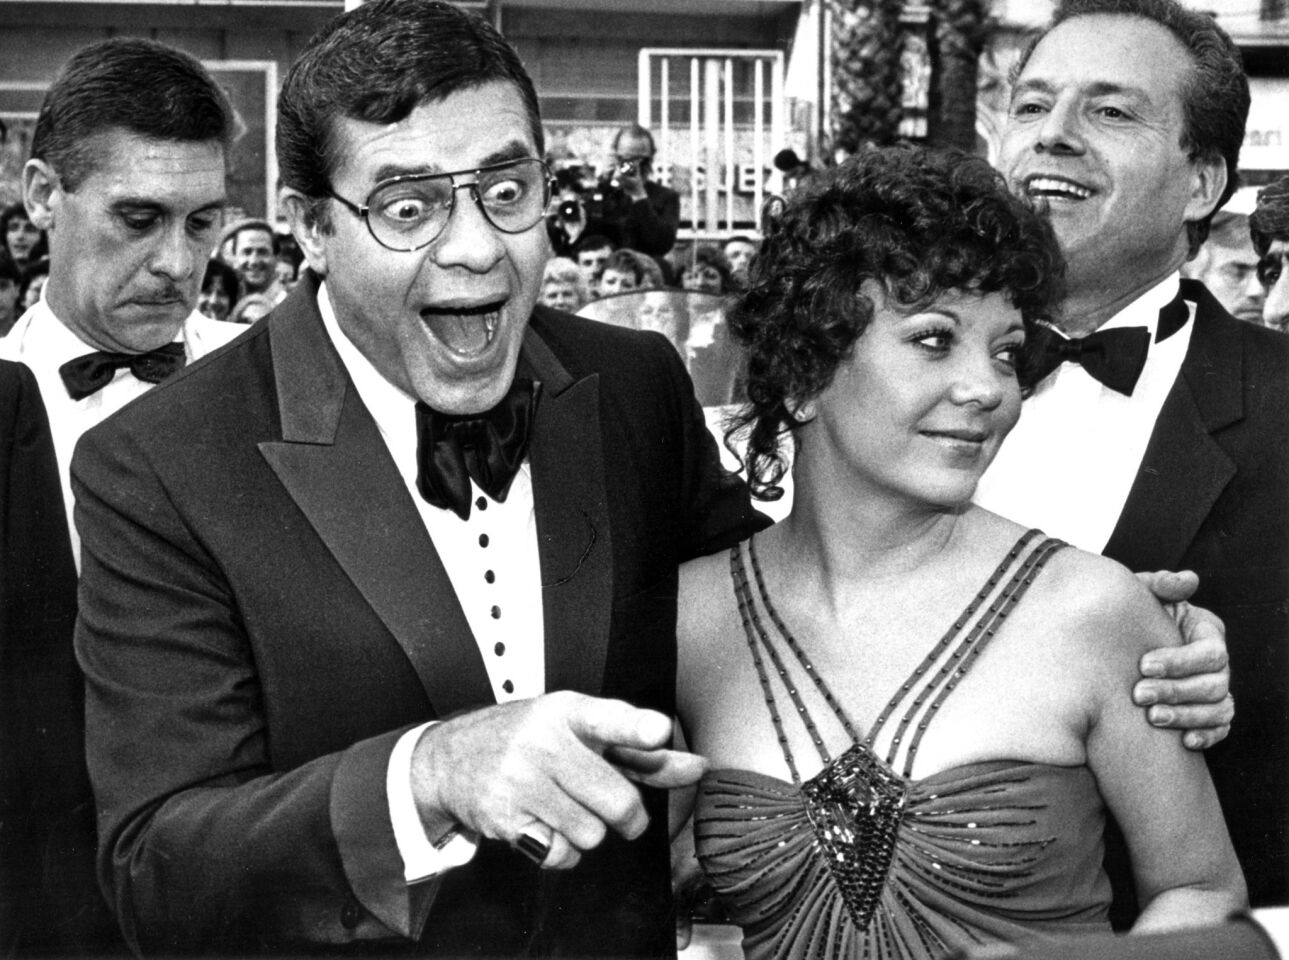 The outrageous funnyman co-hosted the 28th Academy Awards in 1956 in L.A., while Claudette Colbert and writer-director Joseph Mankiewicz hosted a satellite ceremony in New York. He revisited the role in 1957. Lewis and his wife, SanDee, above, pictured at the Cannes Film Festival in 1983.